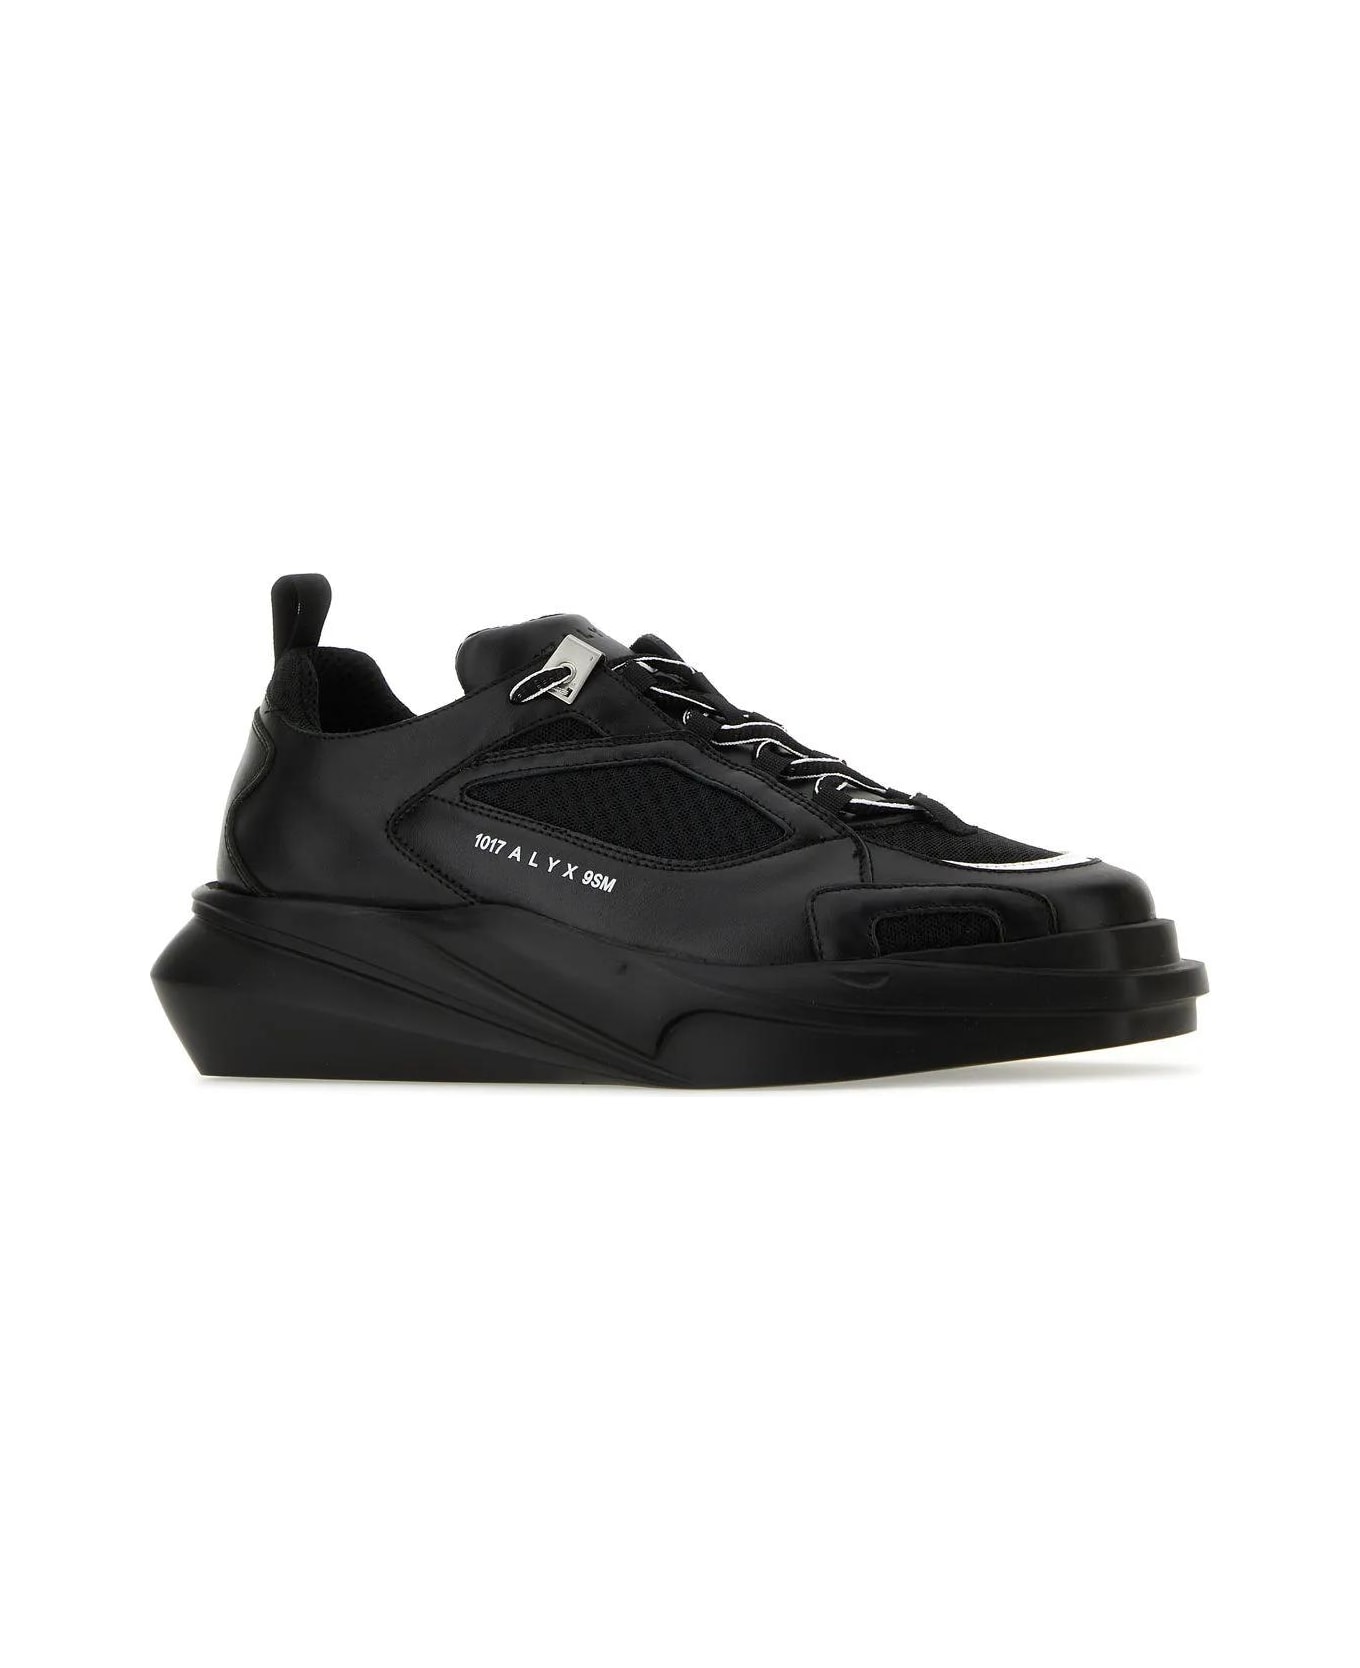 1017 ALYX 9SM Black Leather Hiking Sneakers - Black White スニーカー